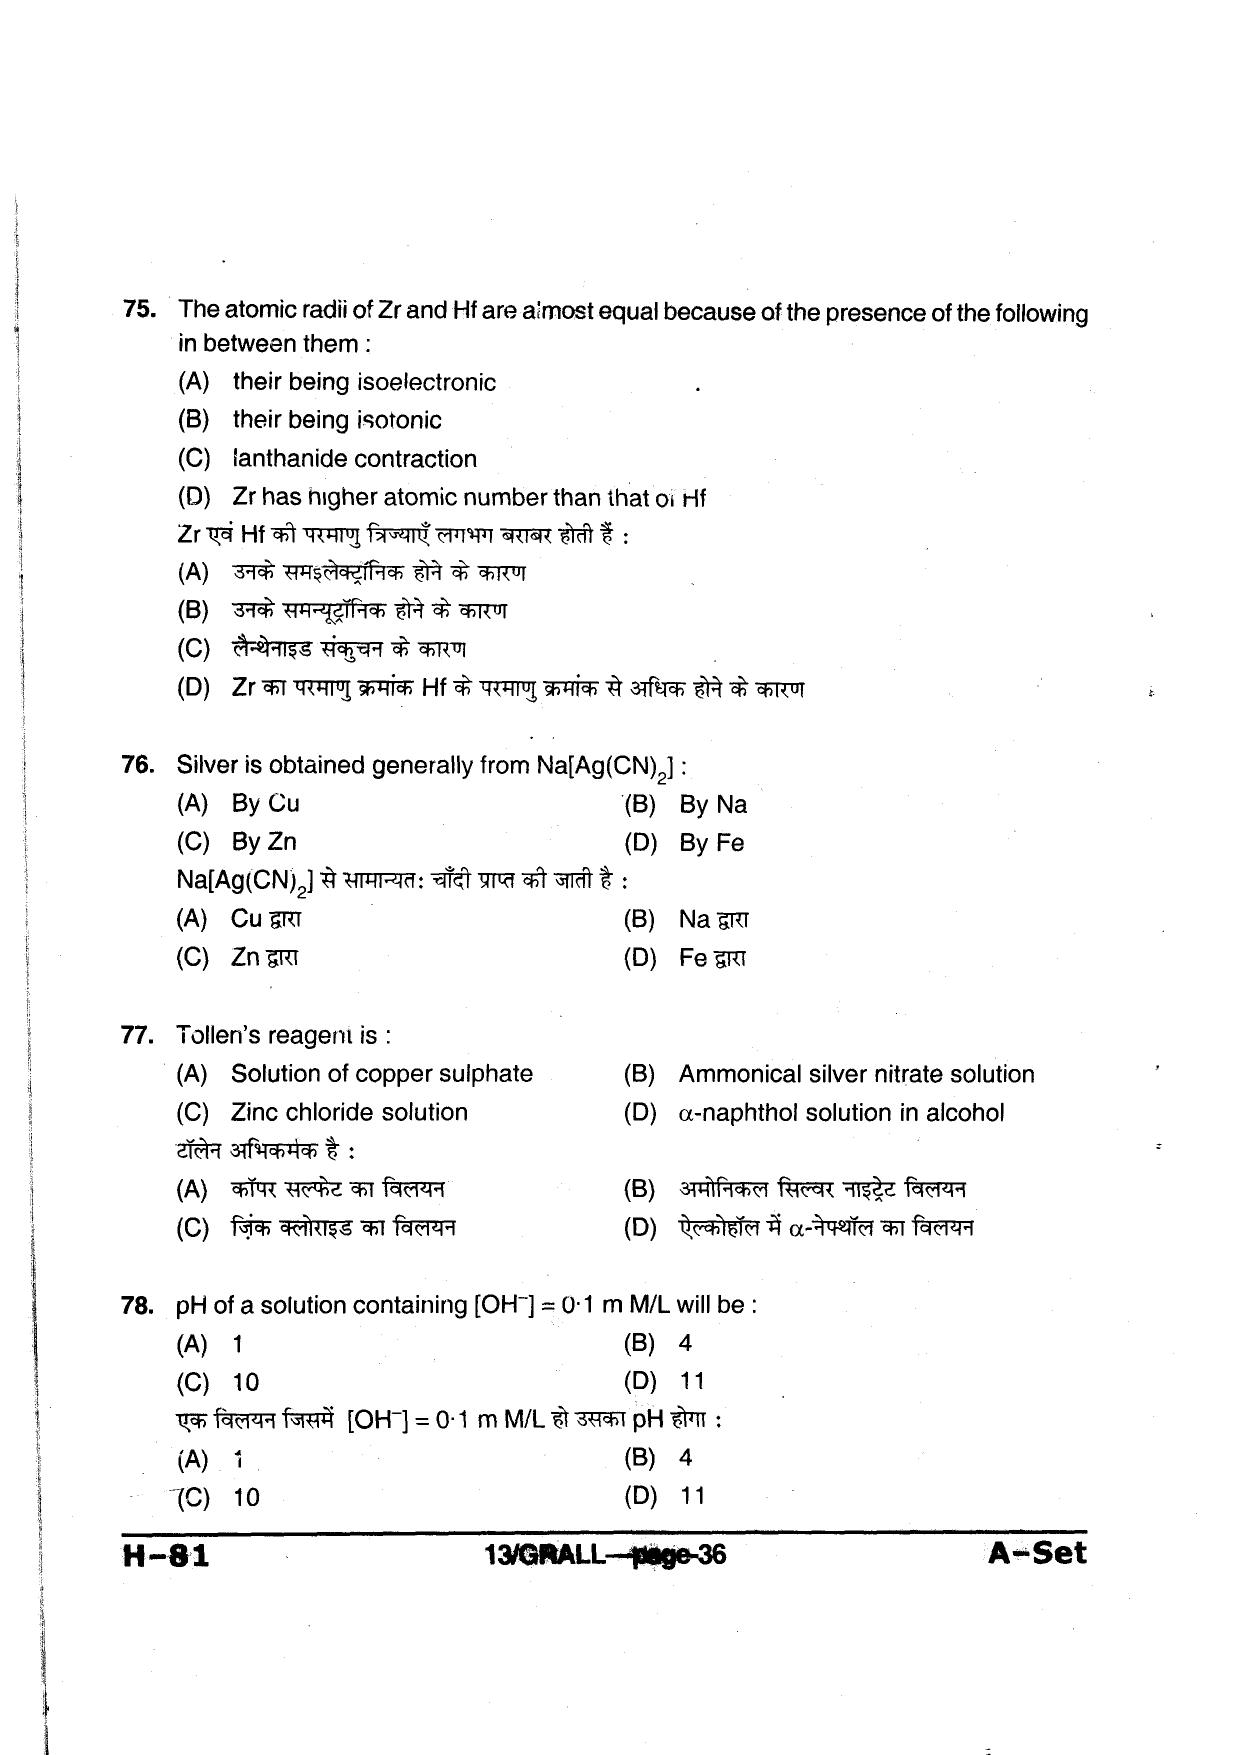 MP PAT 2013 Question Paper - Paper I - Page 36